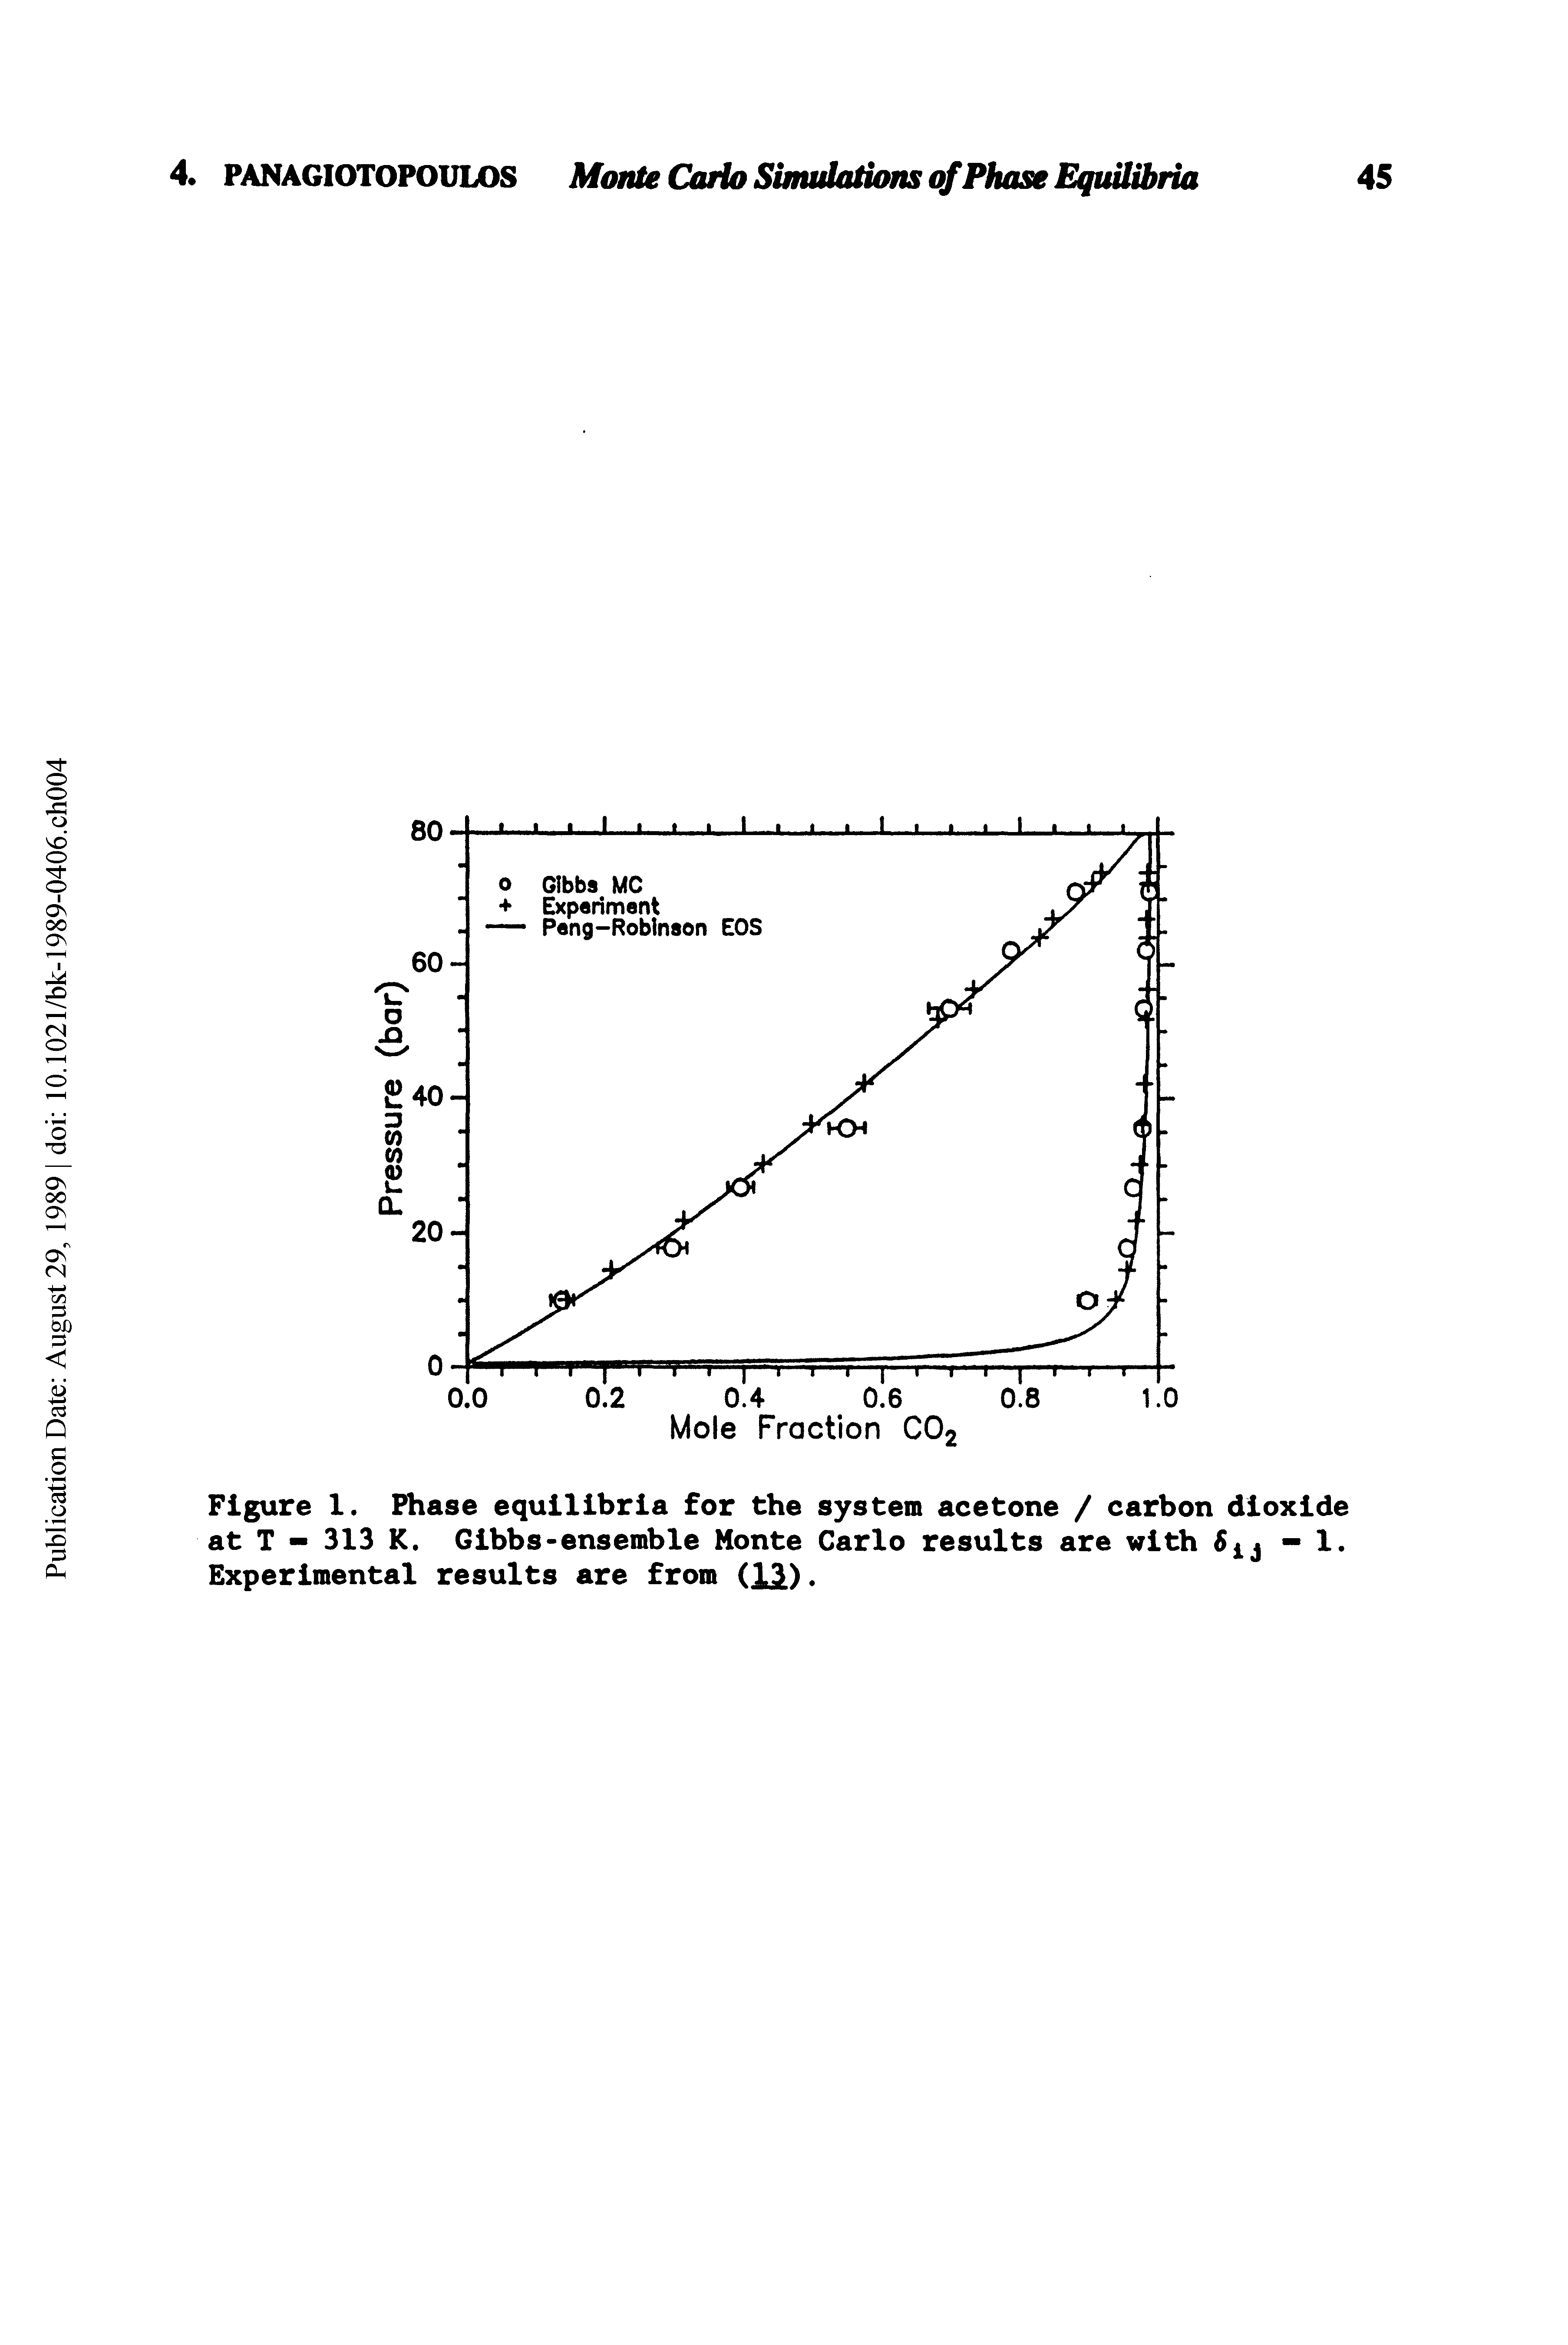 Figure 1. Phase equilibria for the system acetone / carbon dioxide at T - 313 K. Gibbs-ensemble Monte Carlo results are with - 1. Experimental results are from (13).